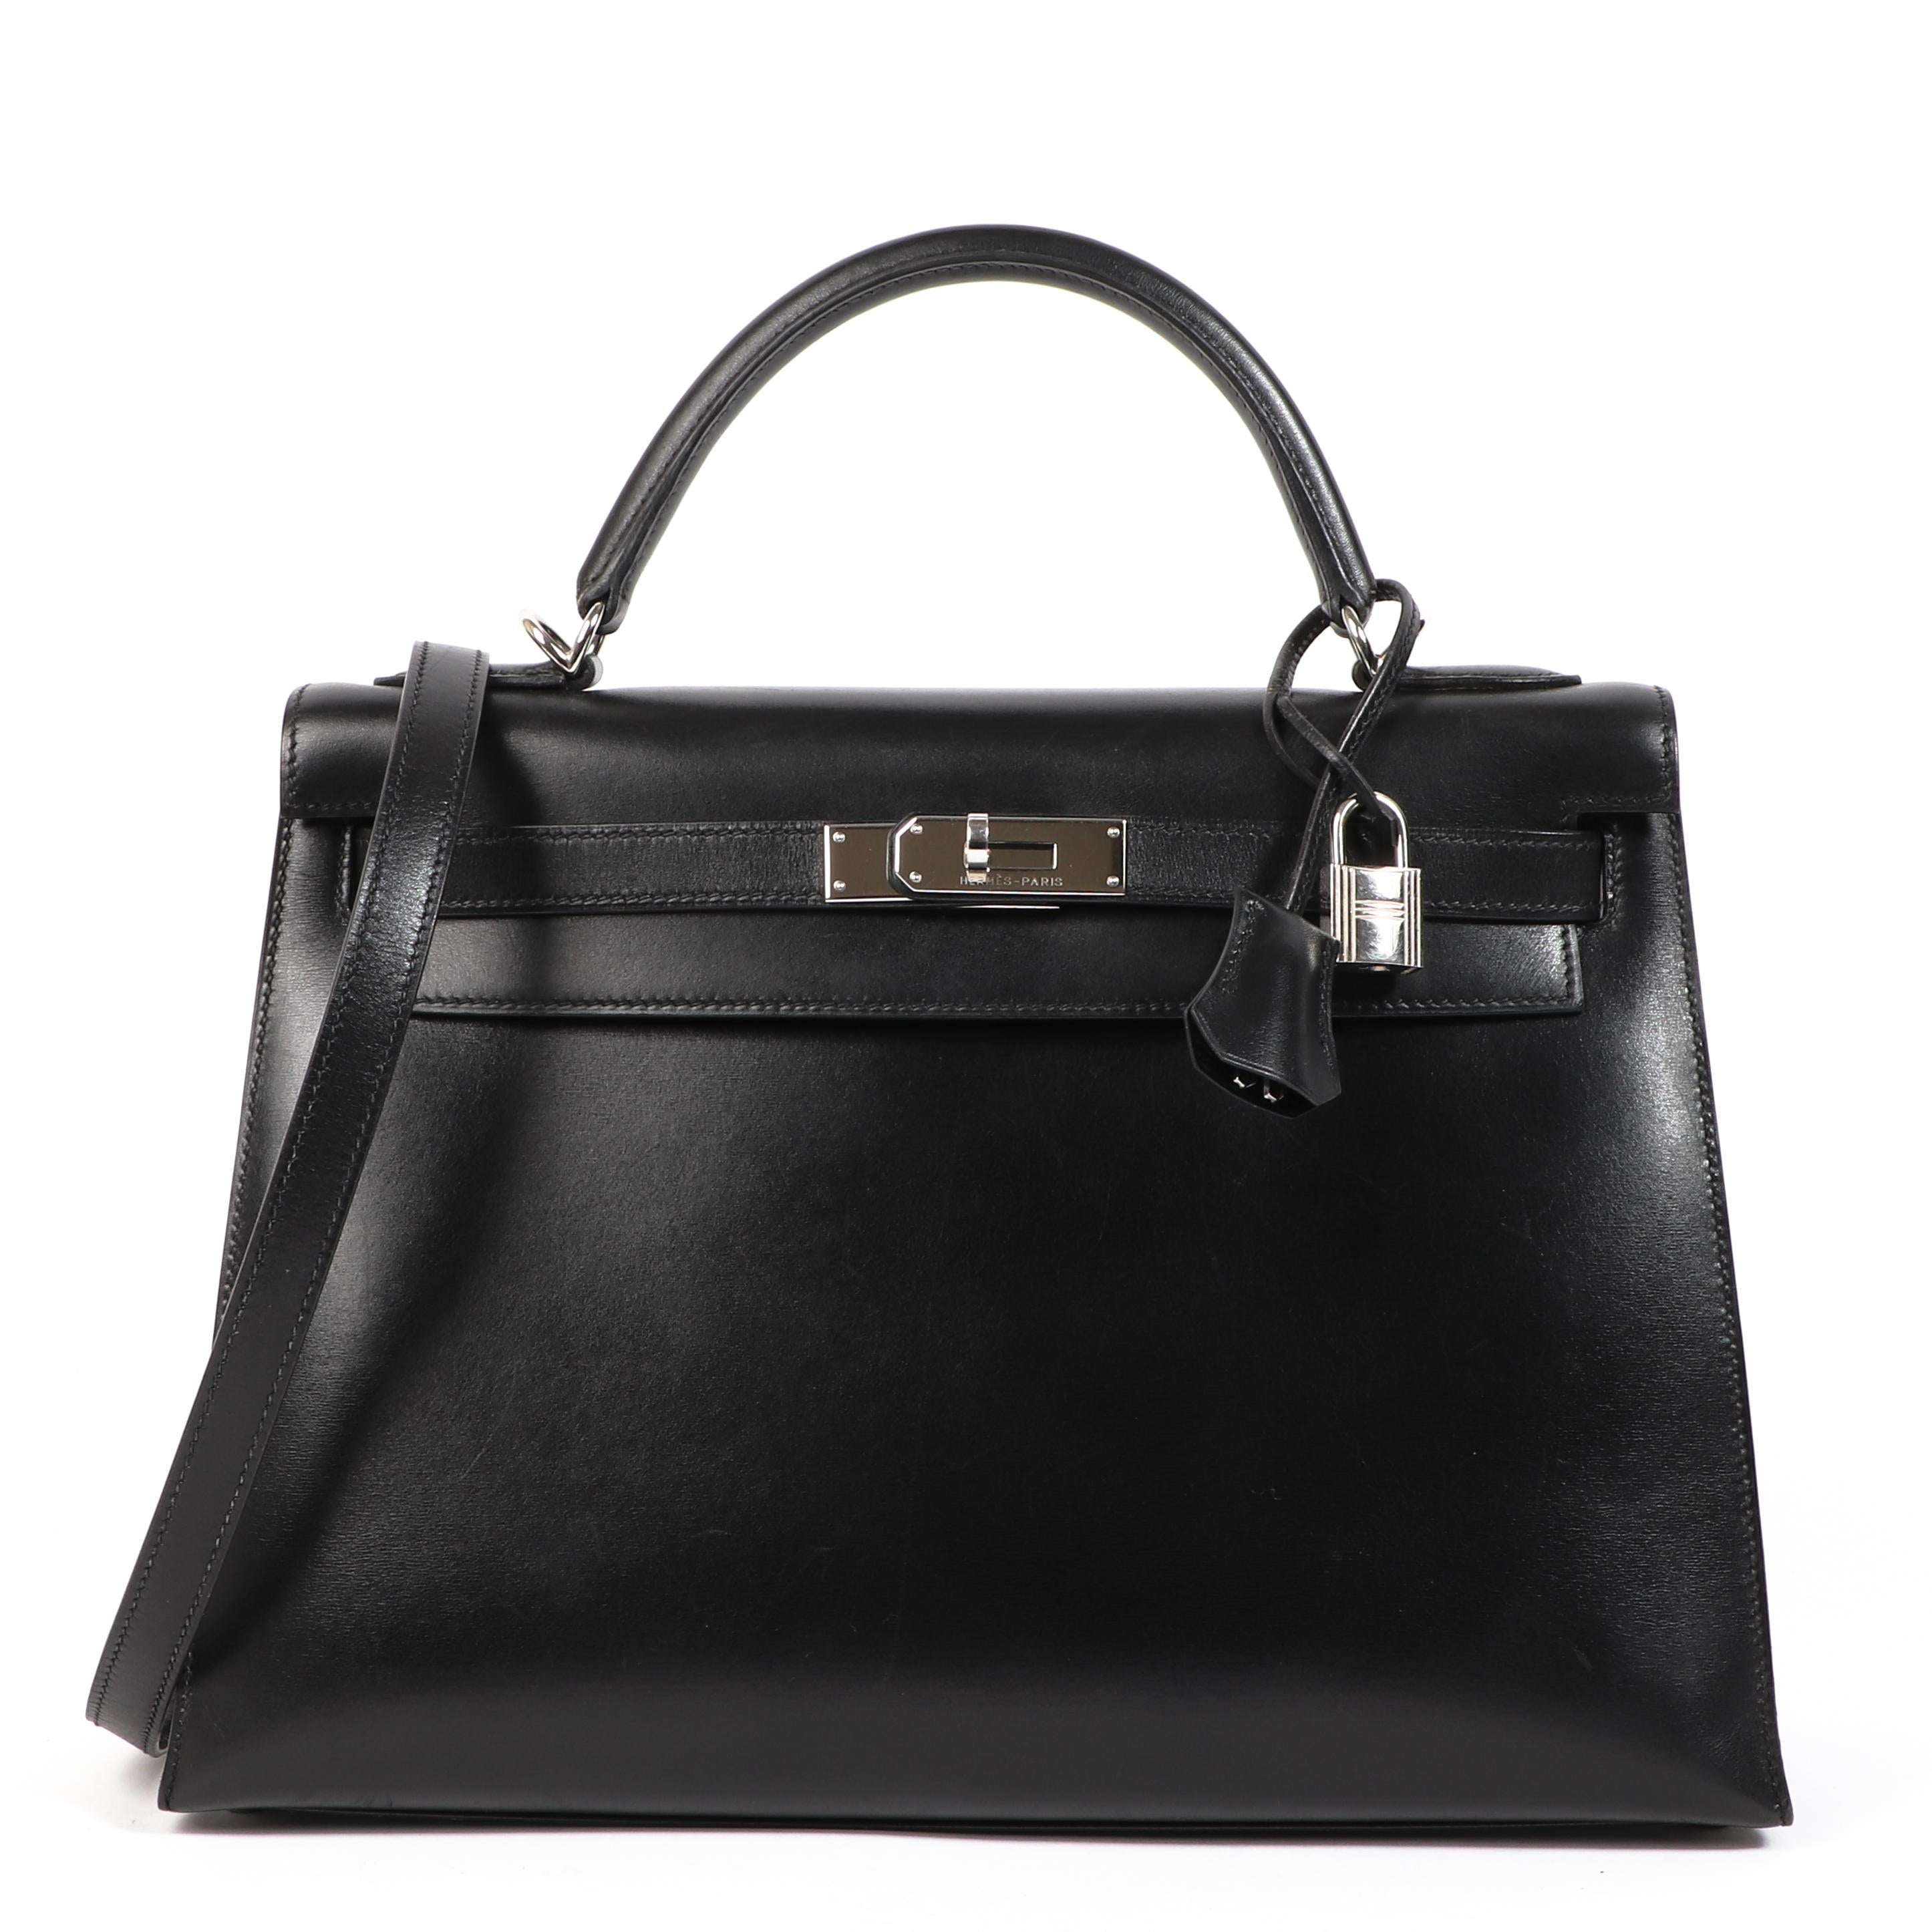 Hermès Kelly 32 Black Box Palladium Hardware

Effortlessly sophisticated, this Hermès Kelly 32 in Box leather is sleek and will never go out of style.

Comes in the most classic Black colour, the bag is paired with modern palladium plated hardware